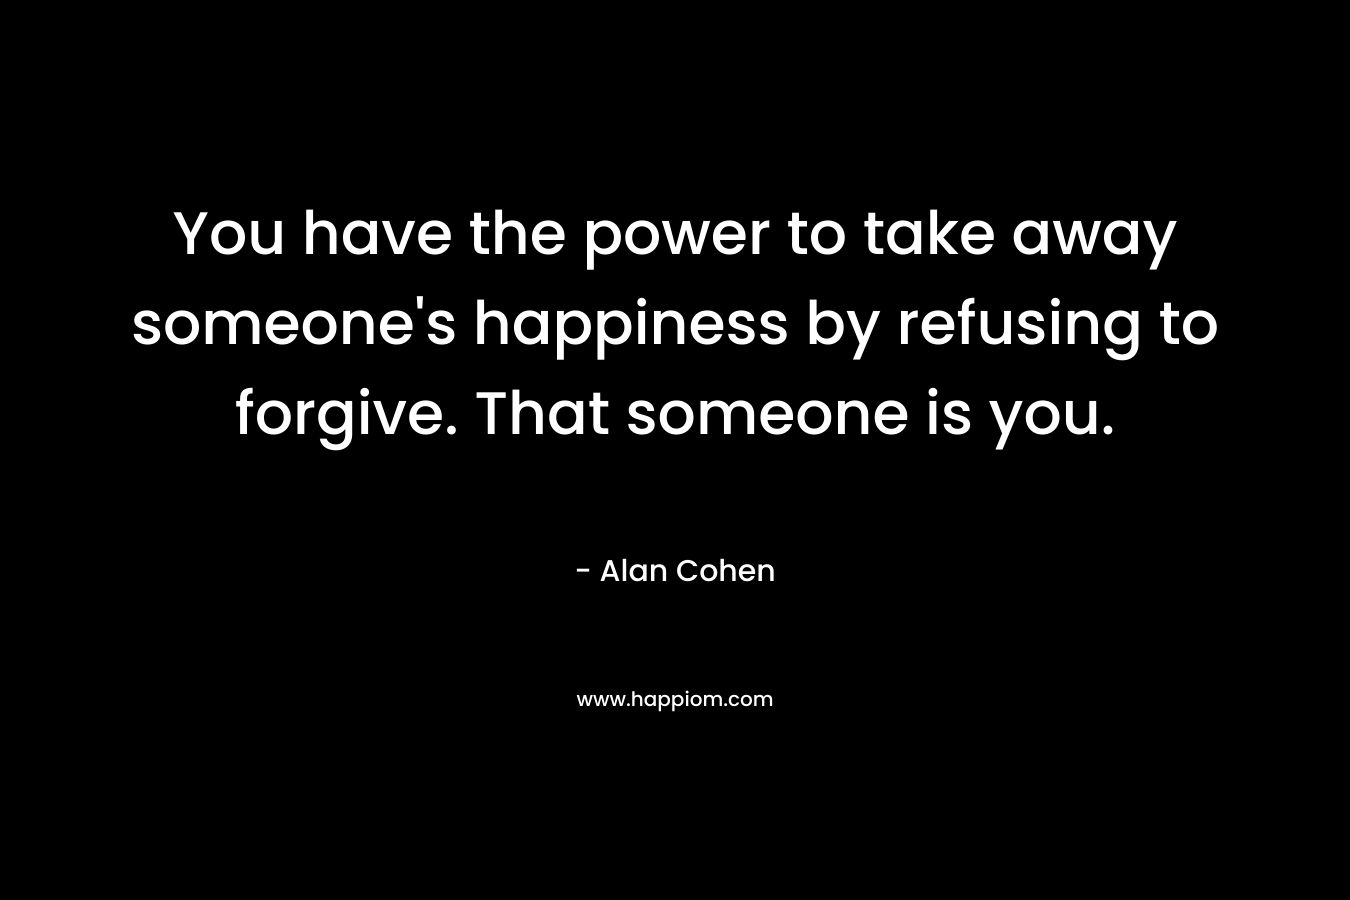 You have the power to take away someone's happiness by refusing to forgive. That someone is you.